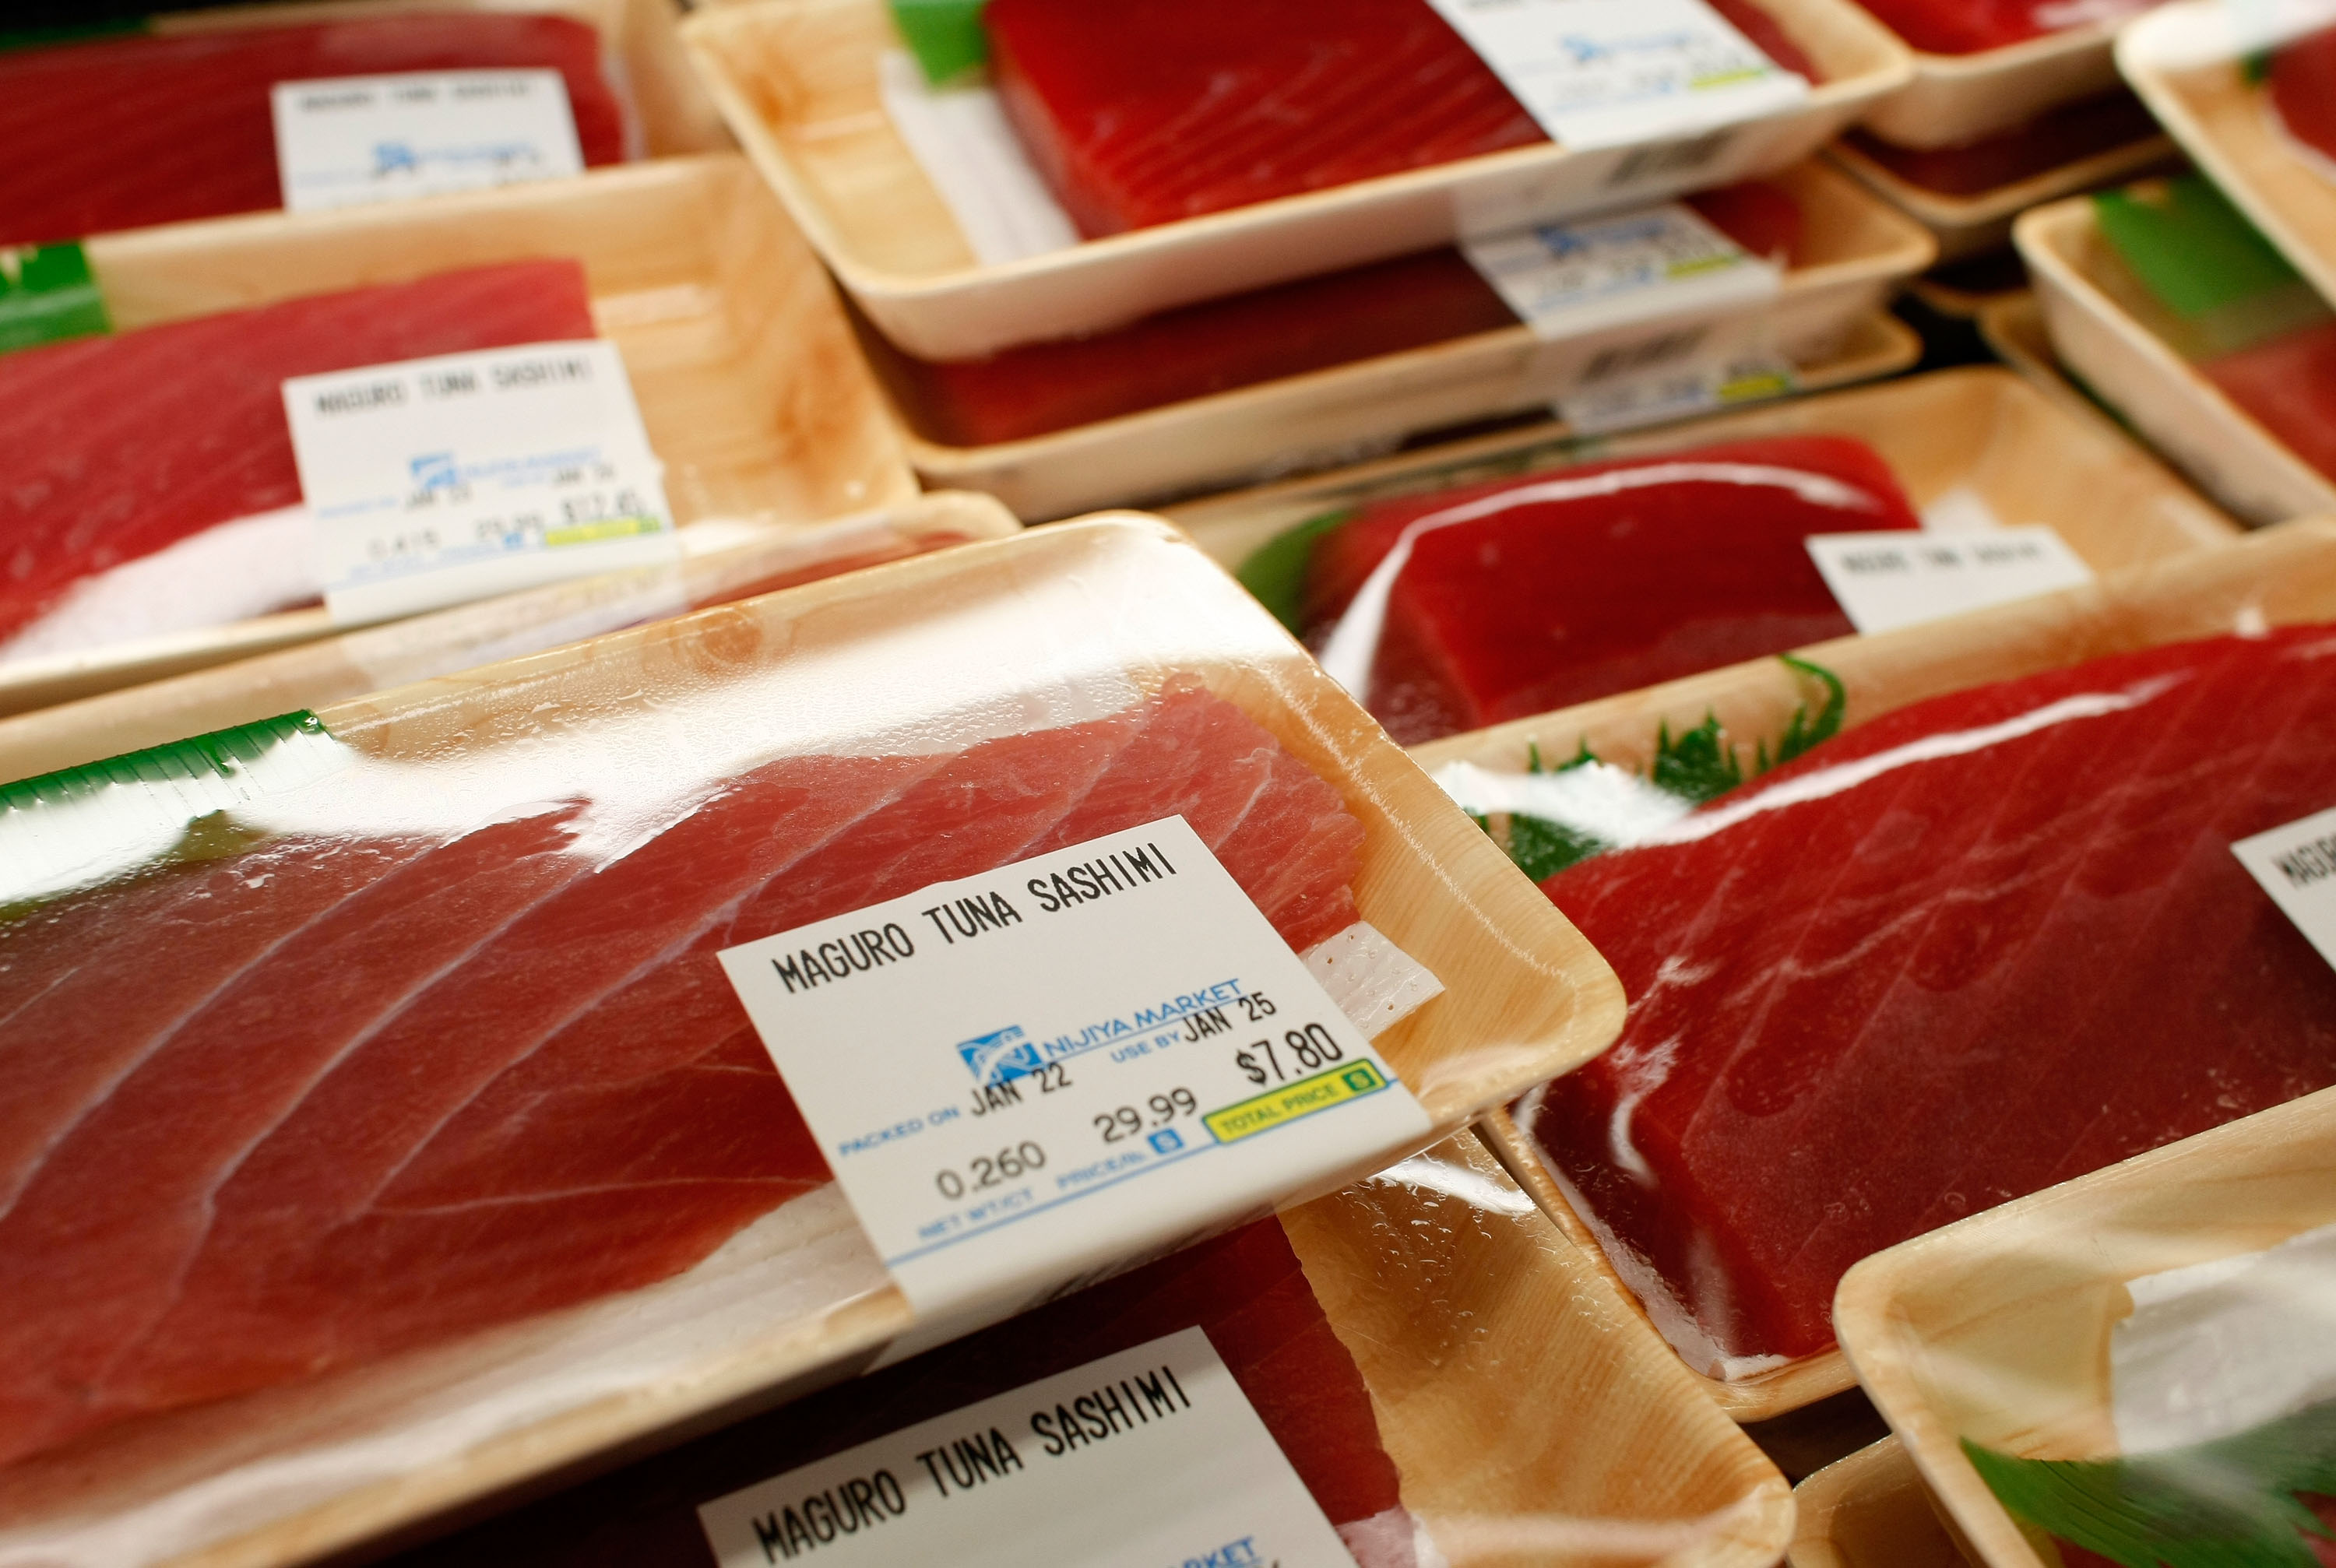 Packages of maguro tuna sashimi are displayed in plastic-wrapped trays with price and weight labels, showcasing the deep red cut of fish.